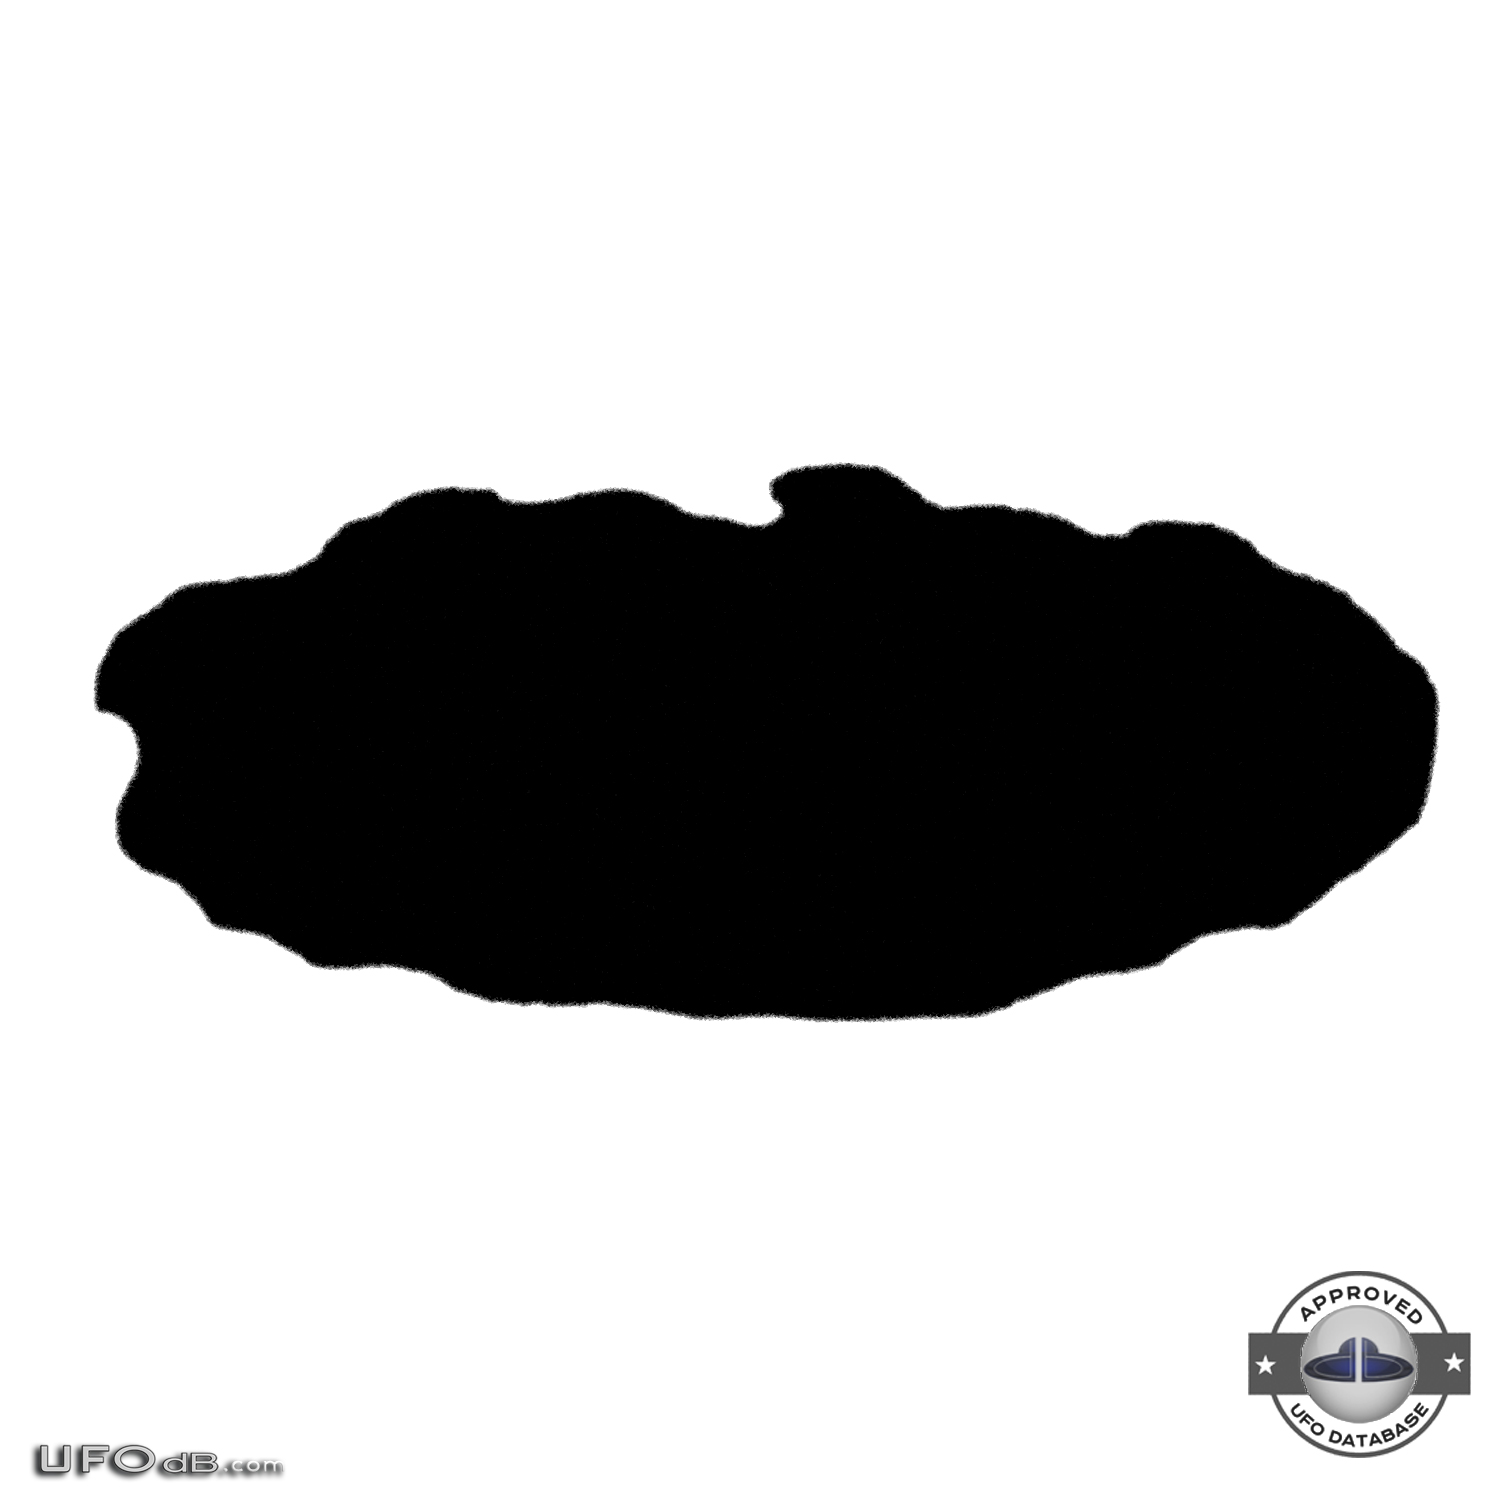 Dark shadowy disc UFO over the Mississippi New Orleans Louisiana 2012 UFO Picture #513-6